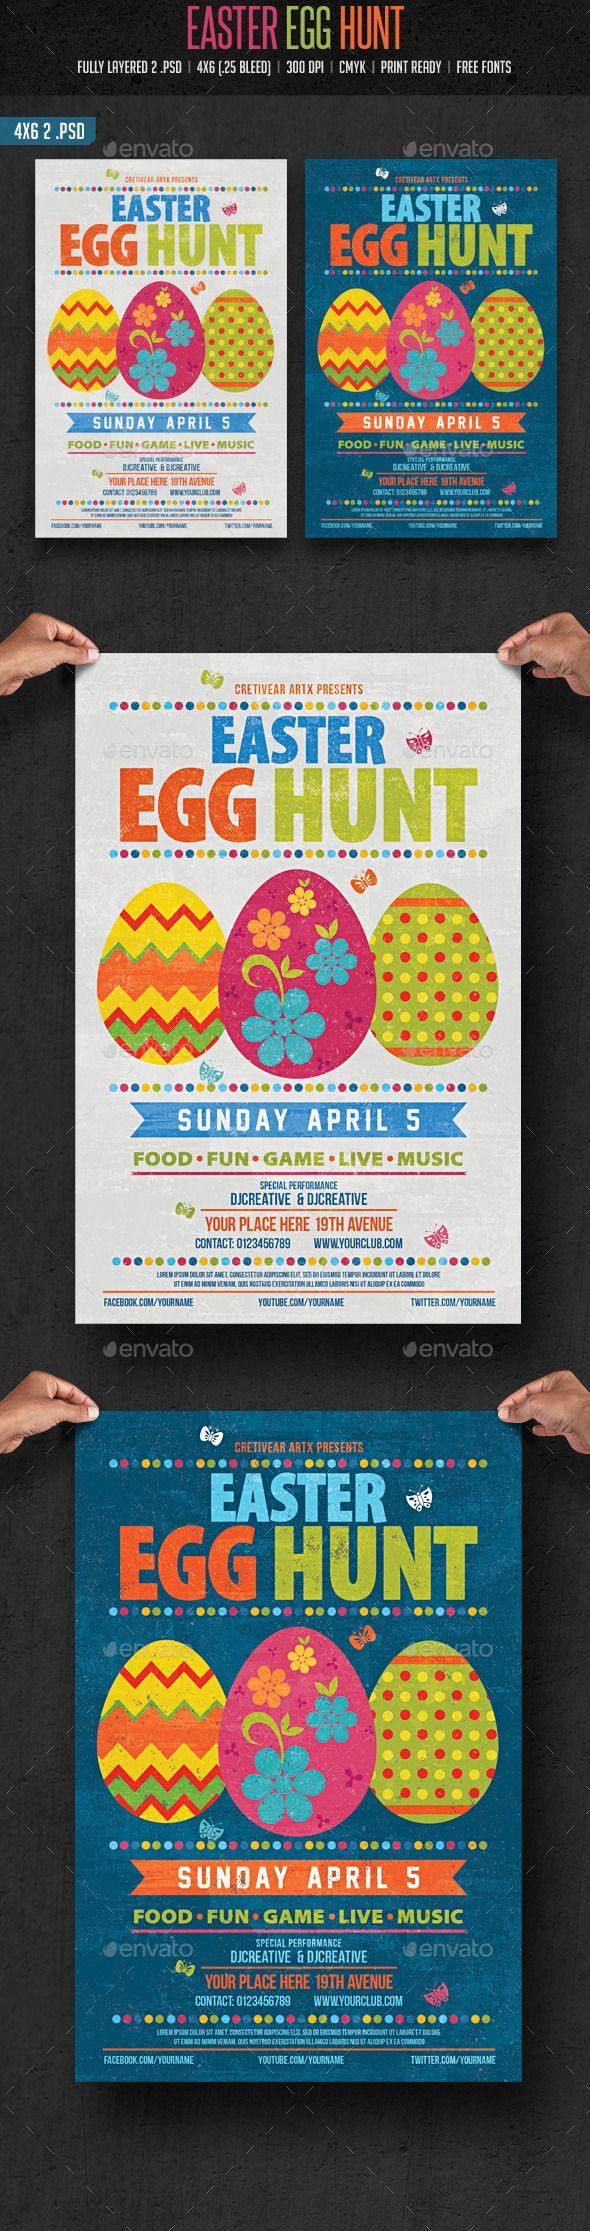 Easter Poster Ideas
 17 best School event posters images on Pinterest